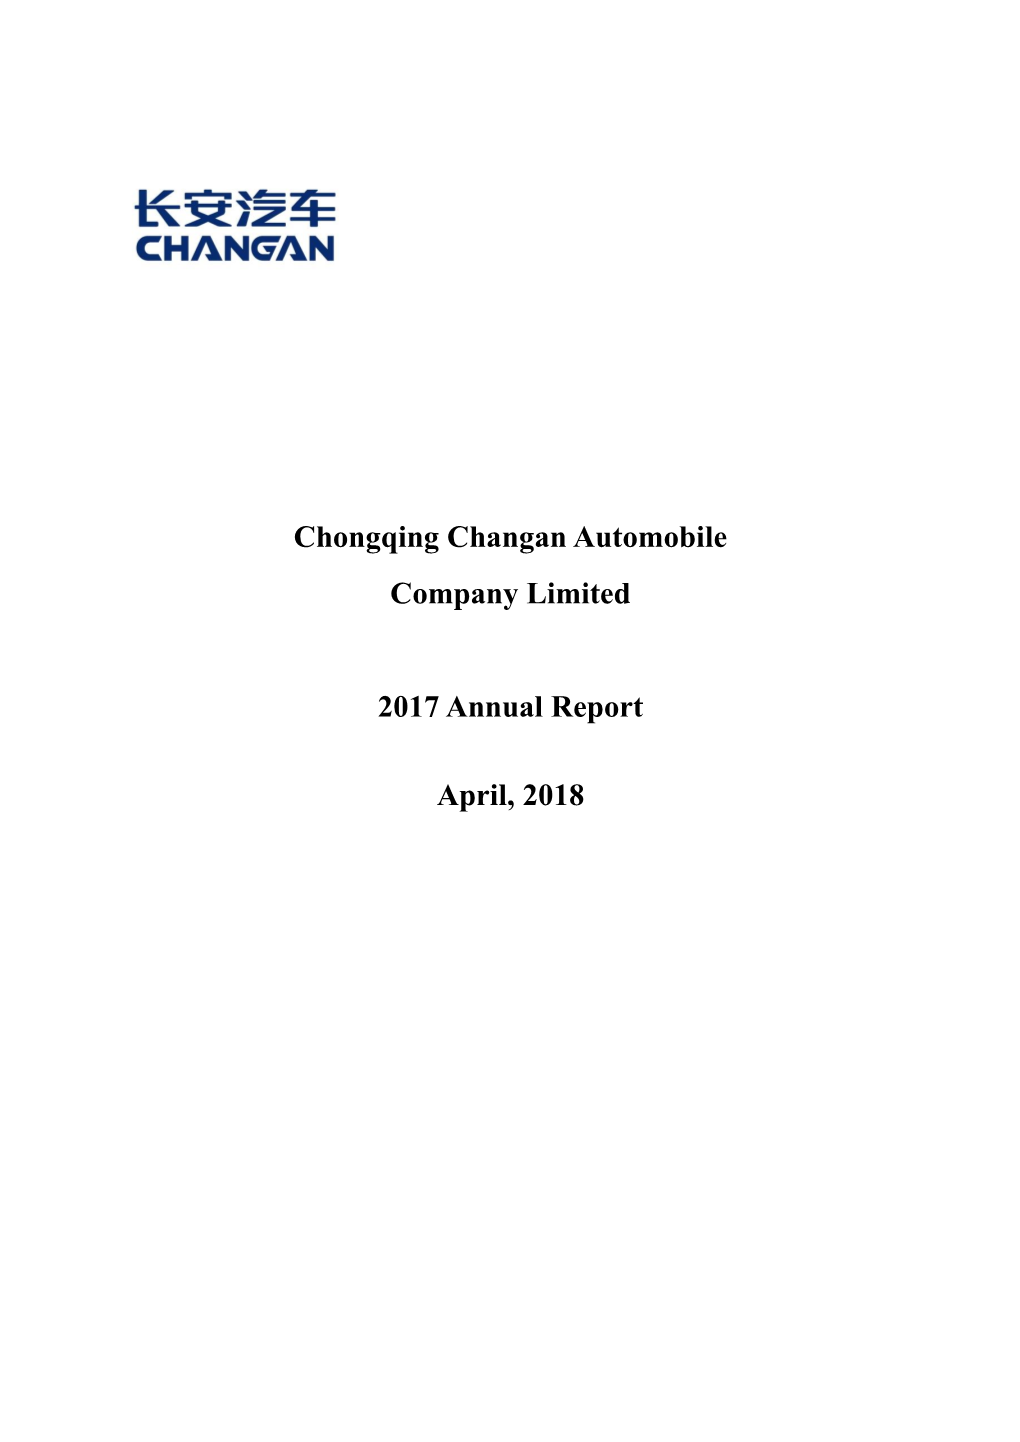 Chongqing Changan Automobile Company Limited 2017 Annual Report